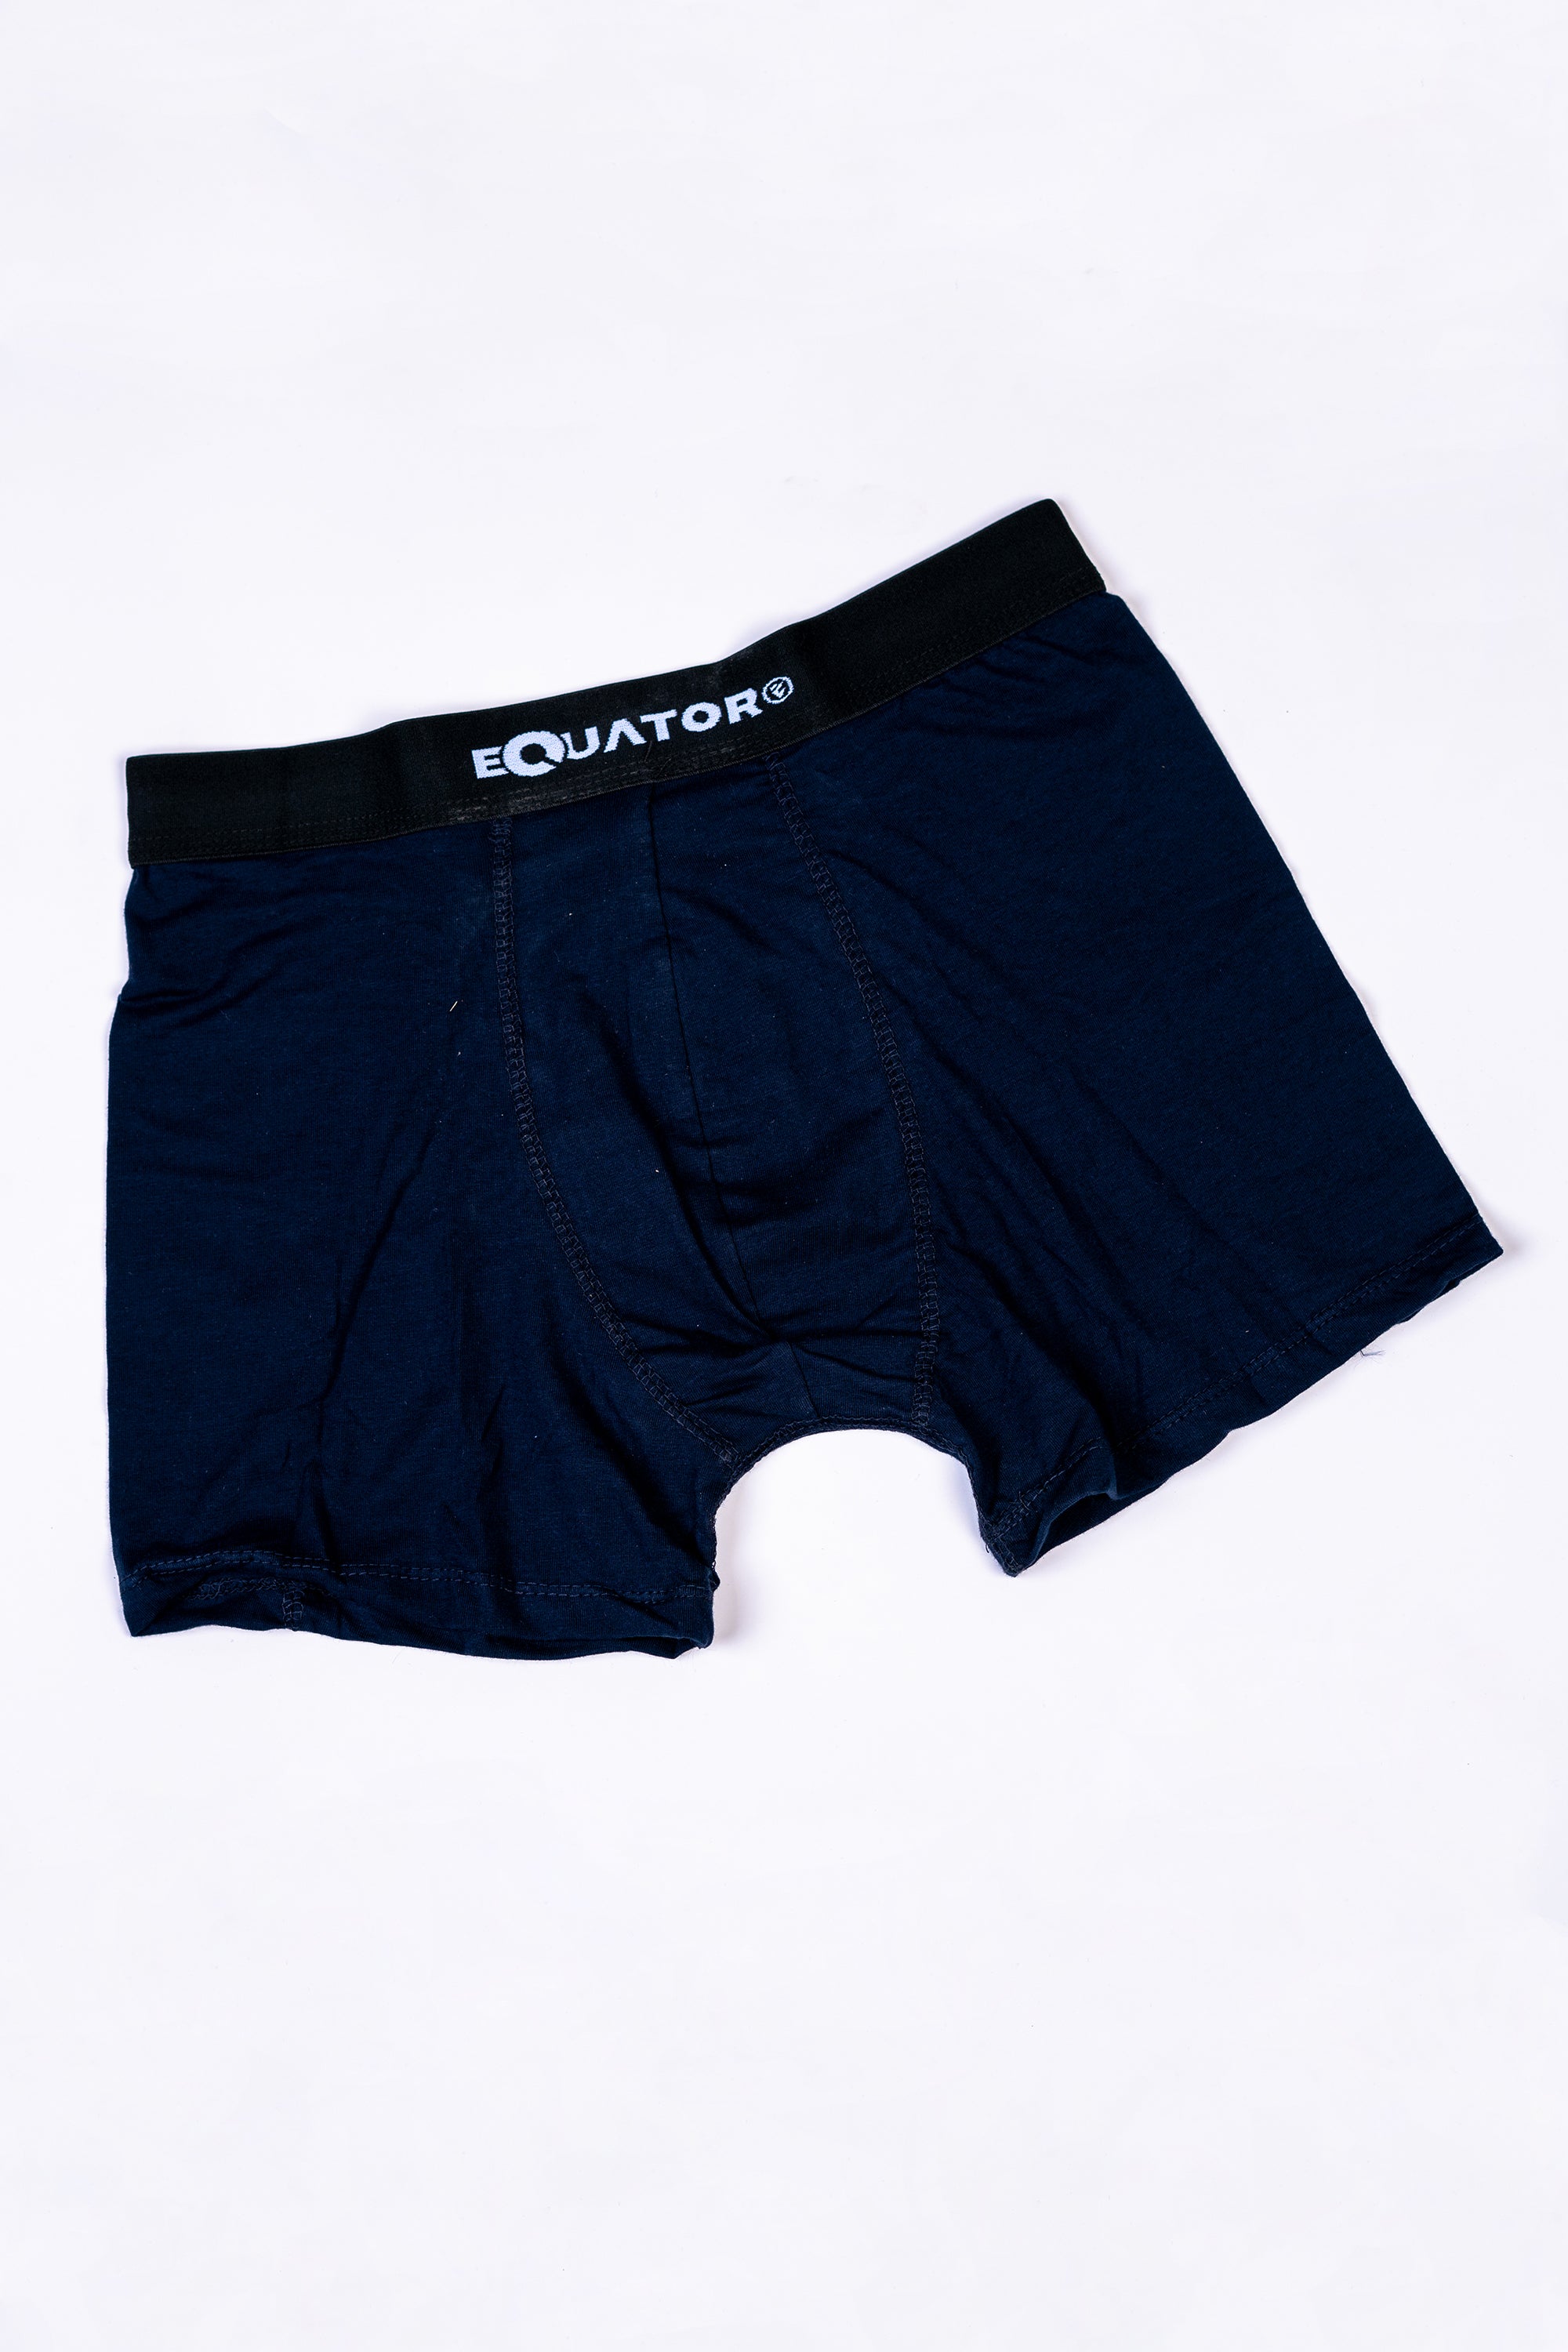 2-PACK BOXERS Equator